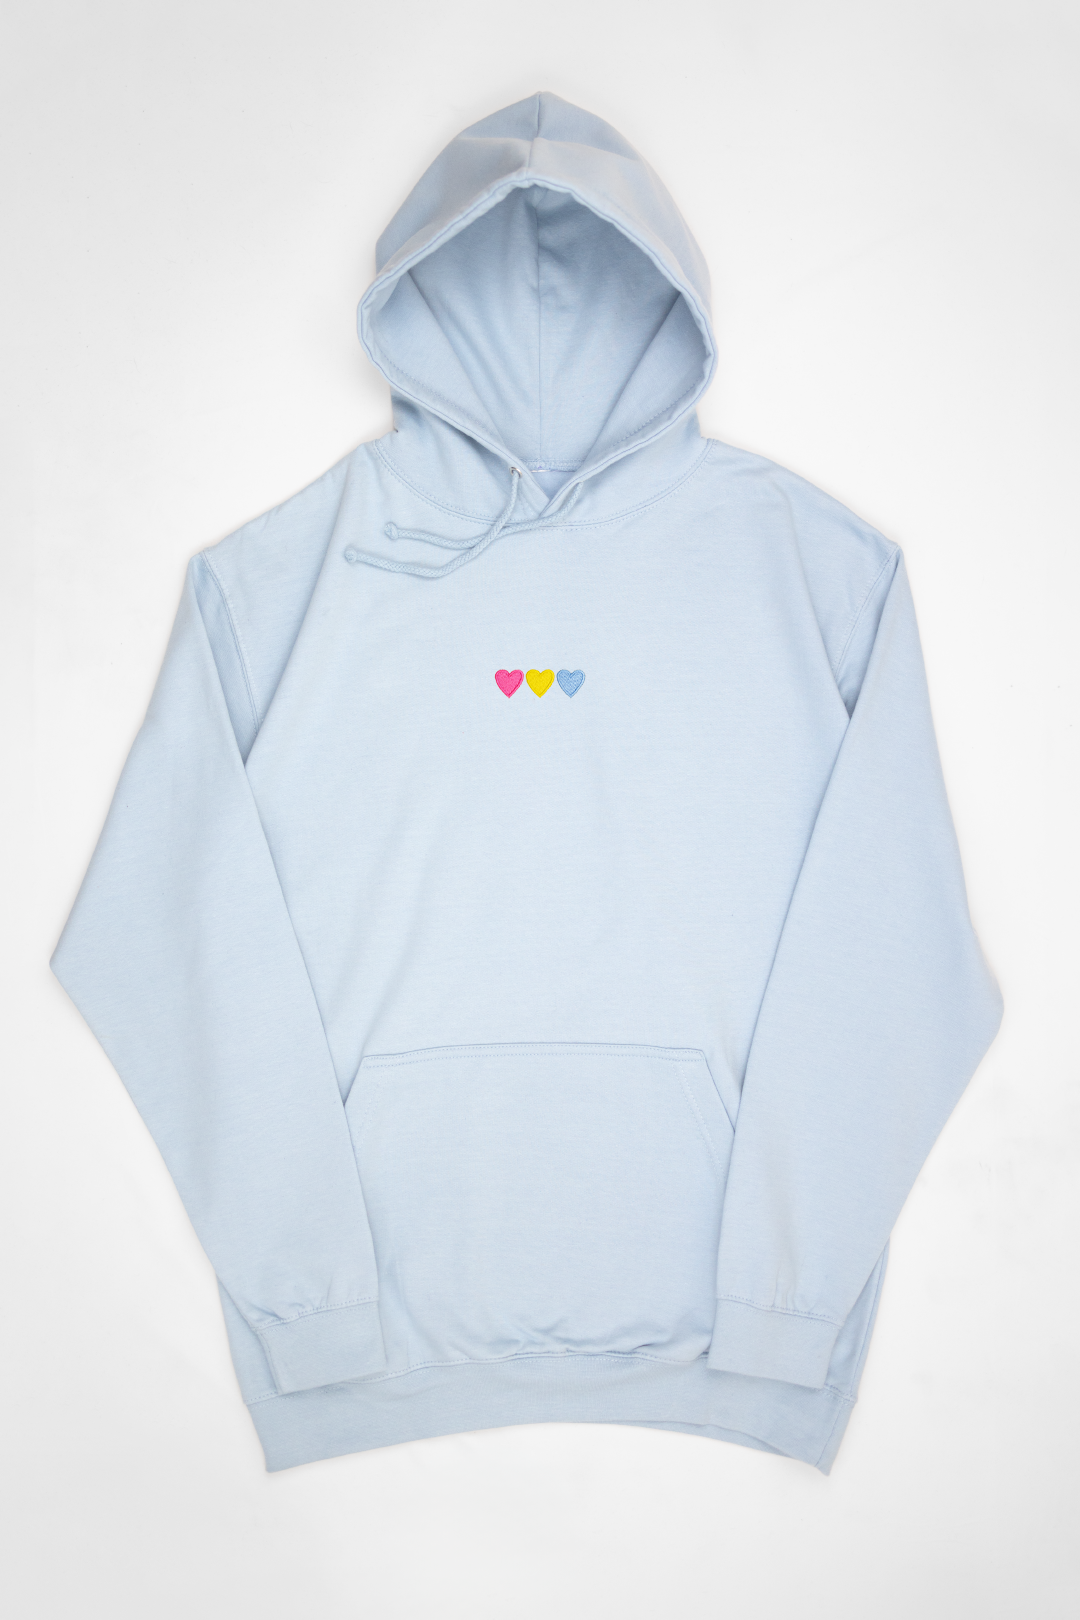 Embroidered Hearts Pansexual Hoodie